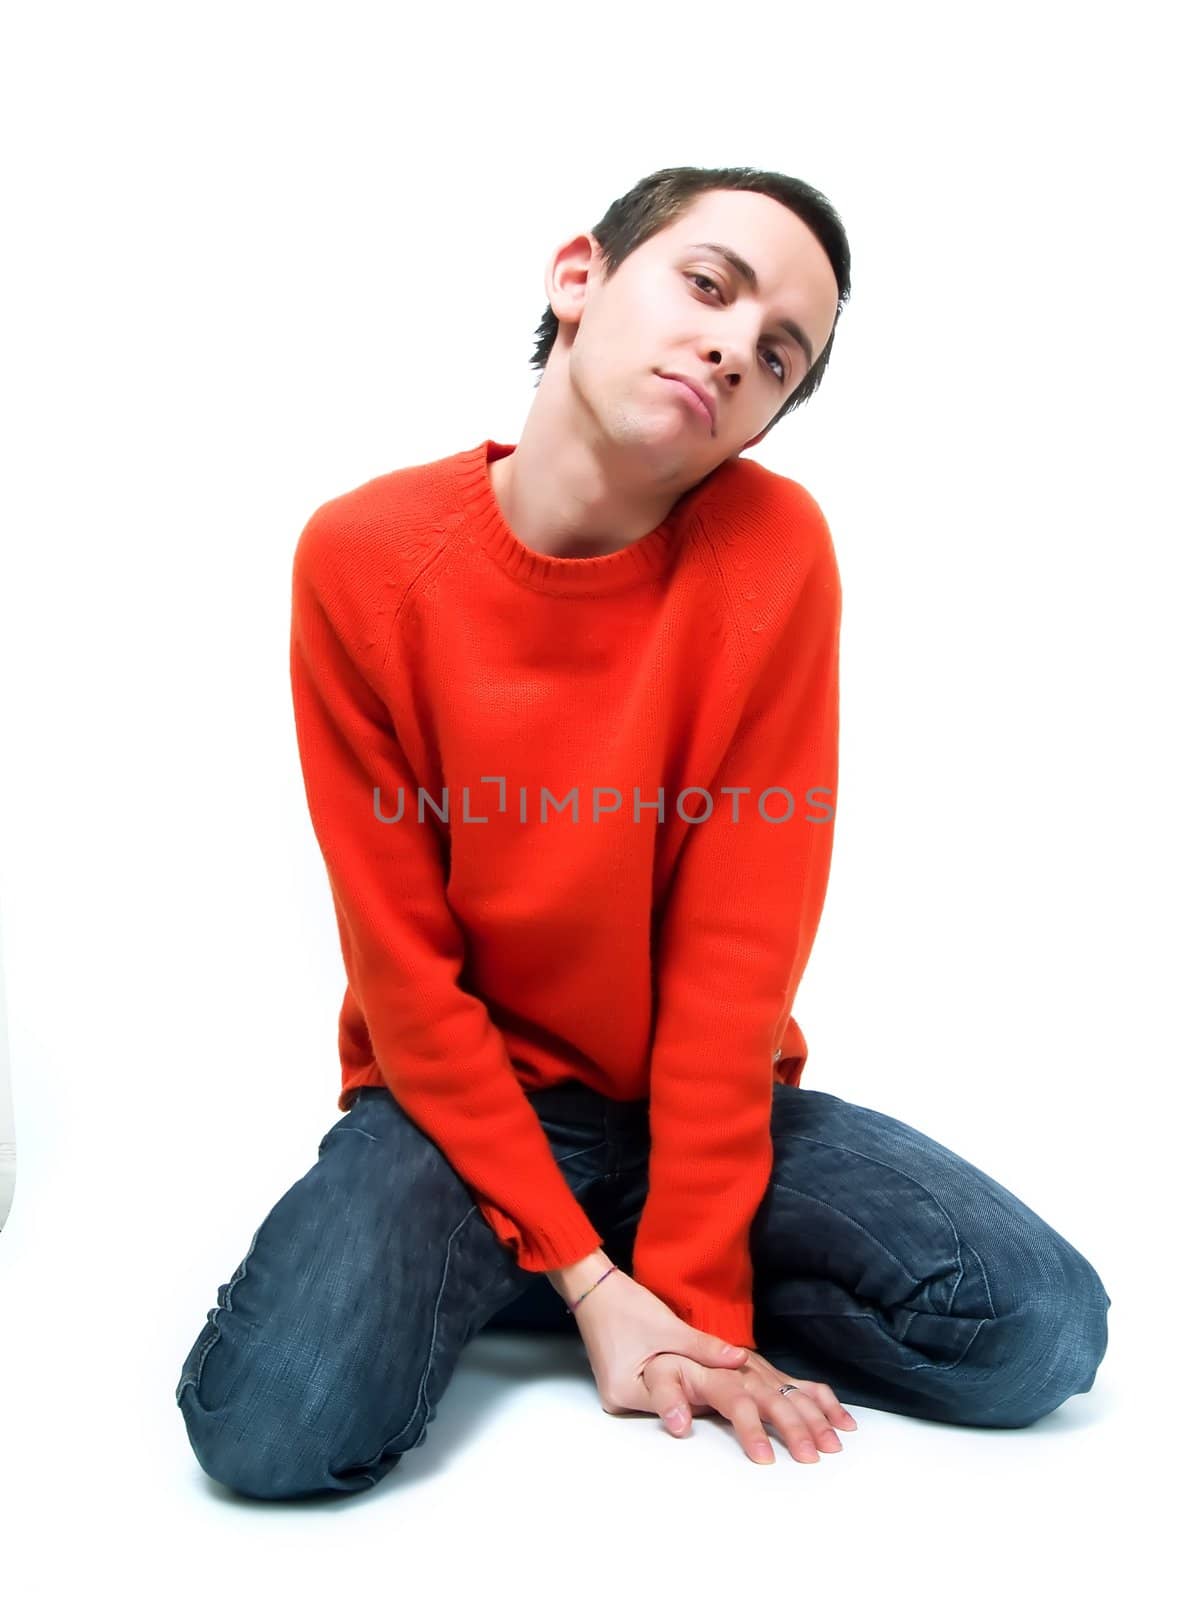 Teenager posing on a white background